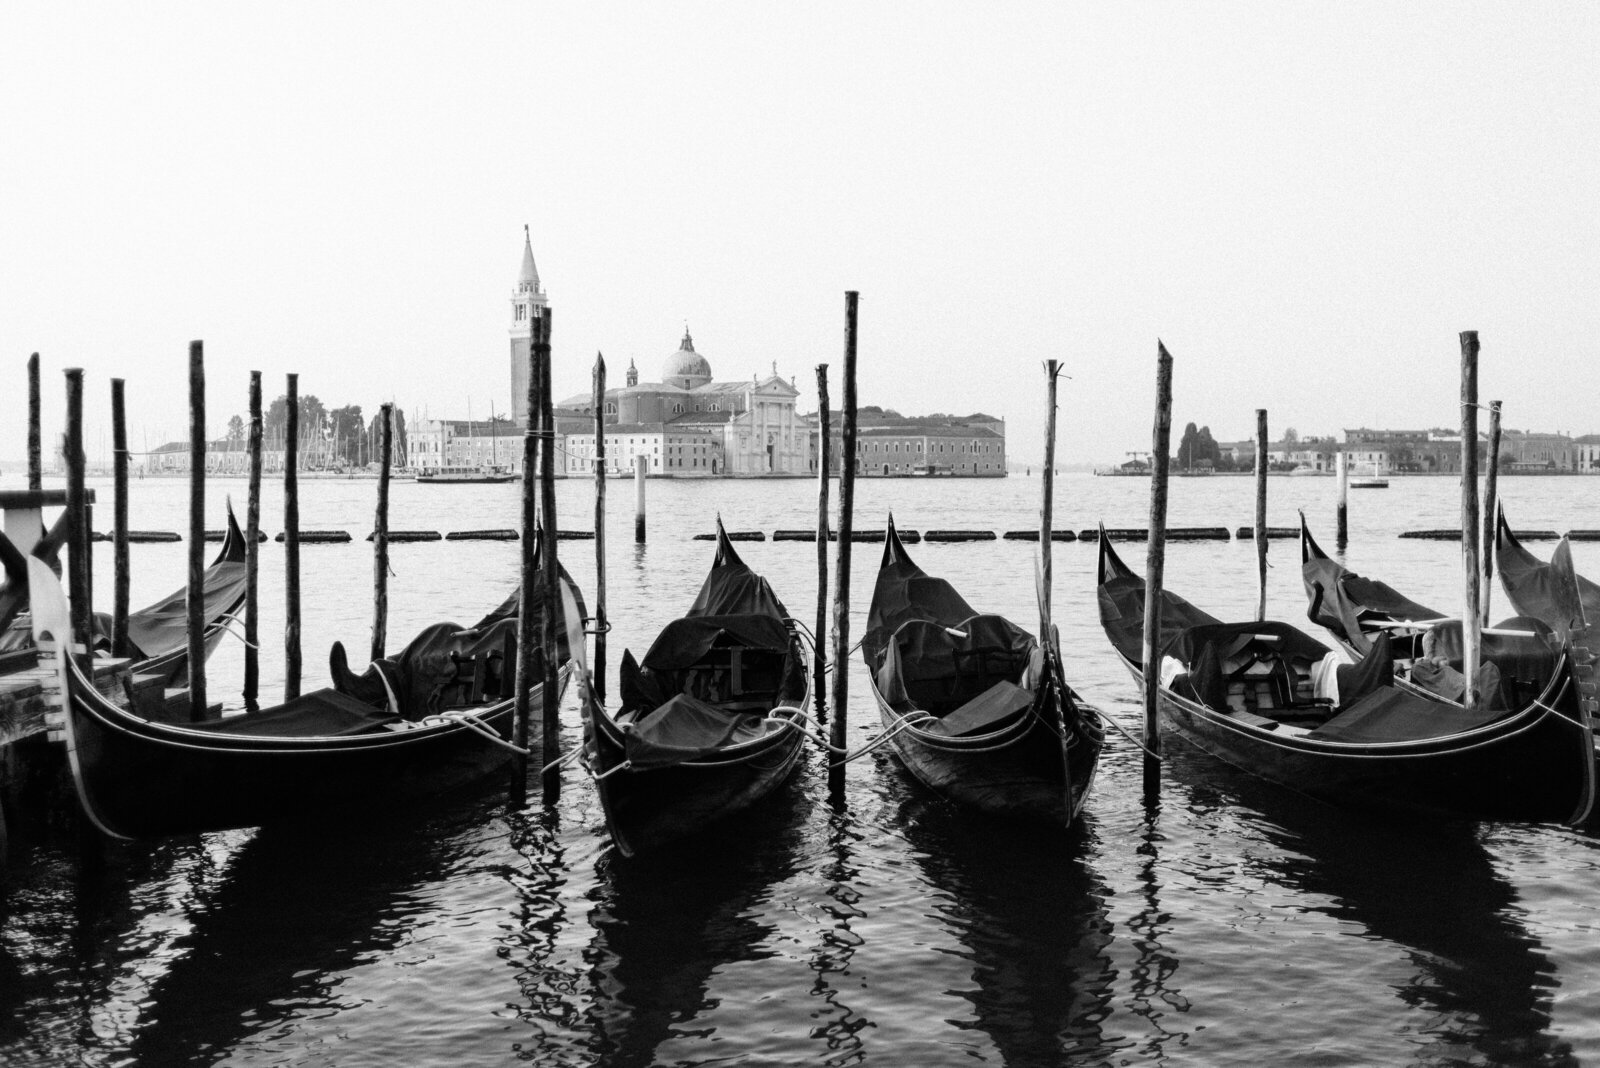 Gondolas in a row in the water